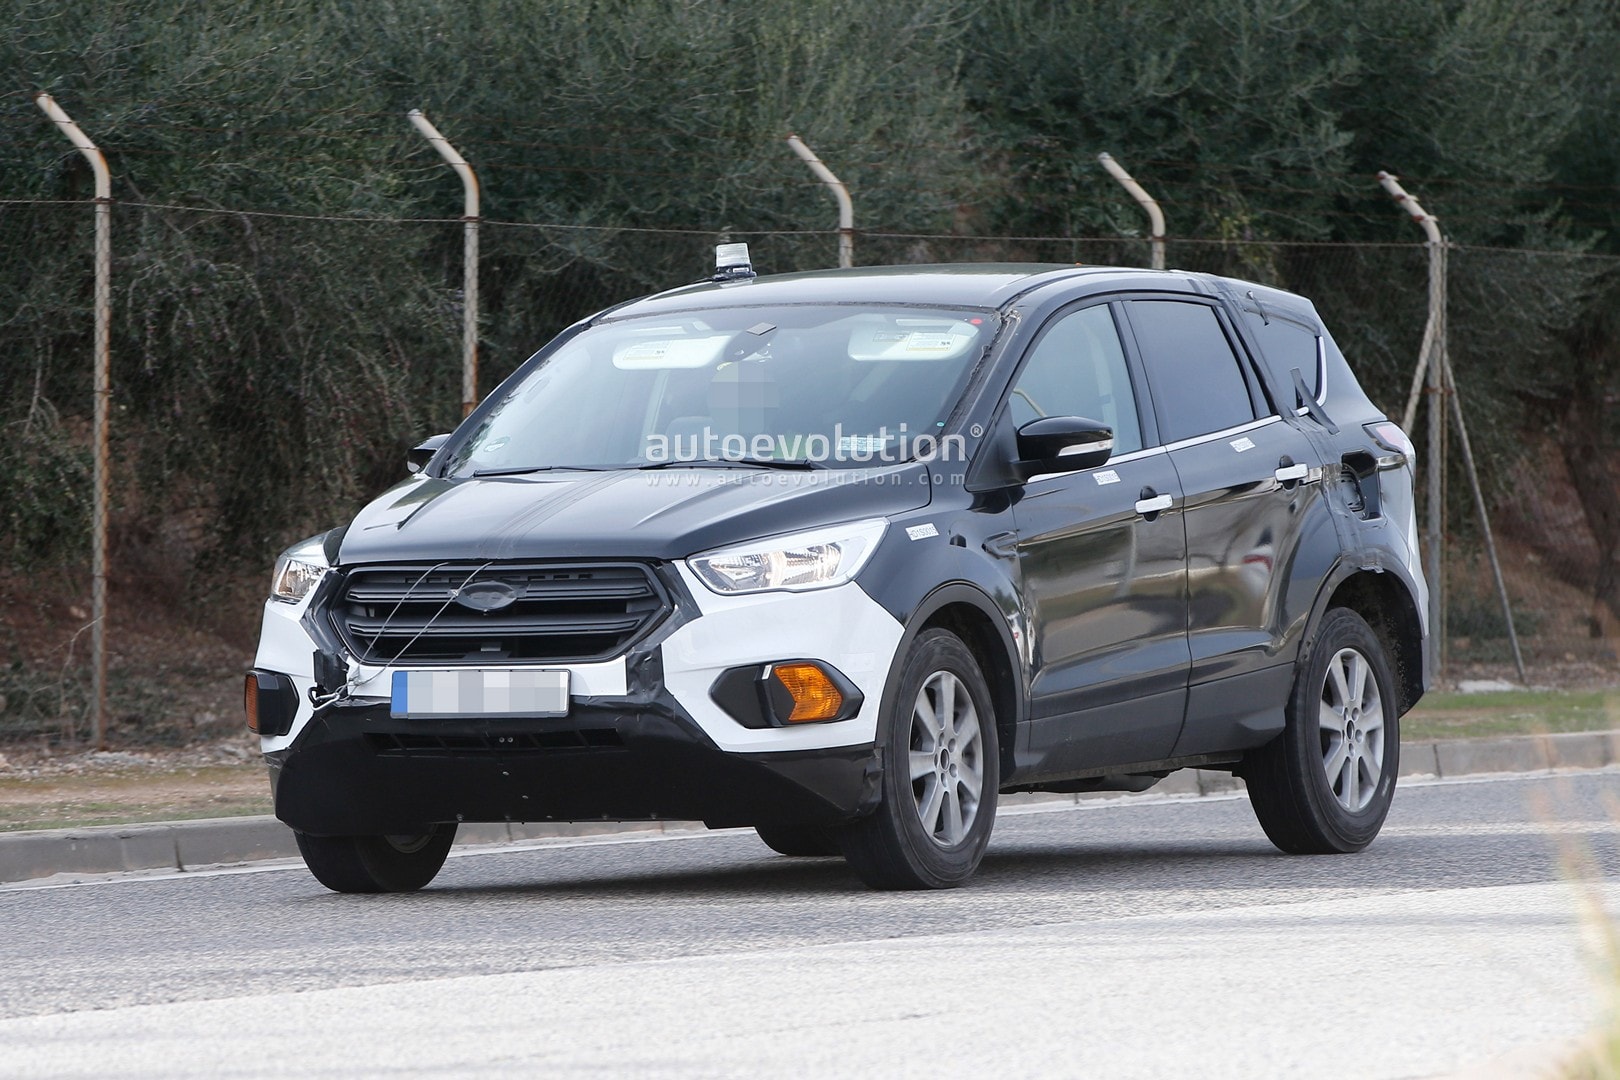 2020 Ford Escape / Kuga SUV Prototype Spied for the First ...